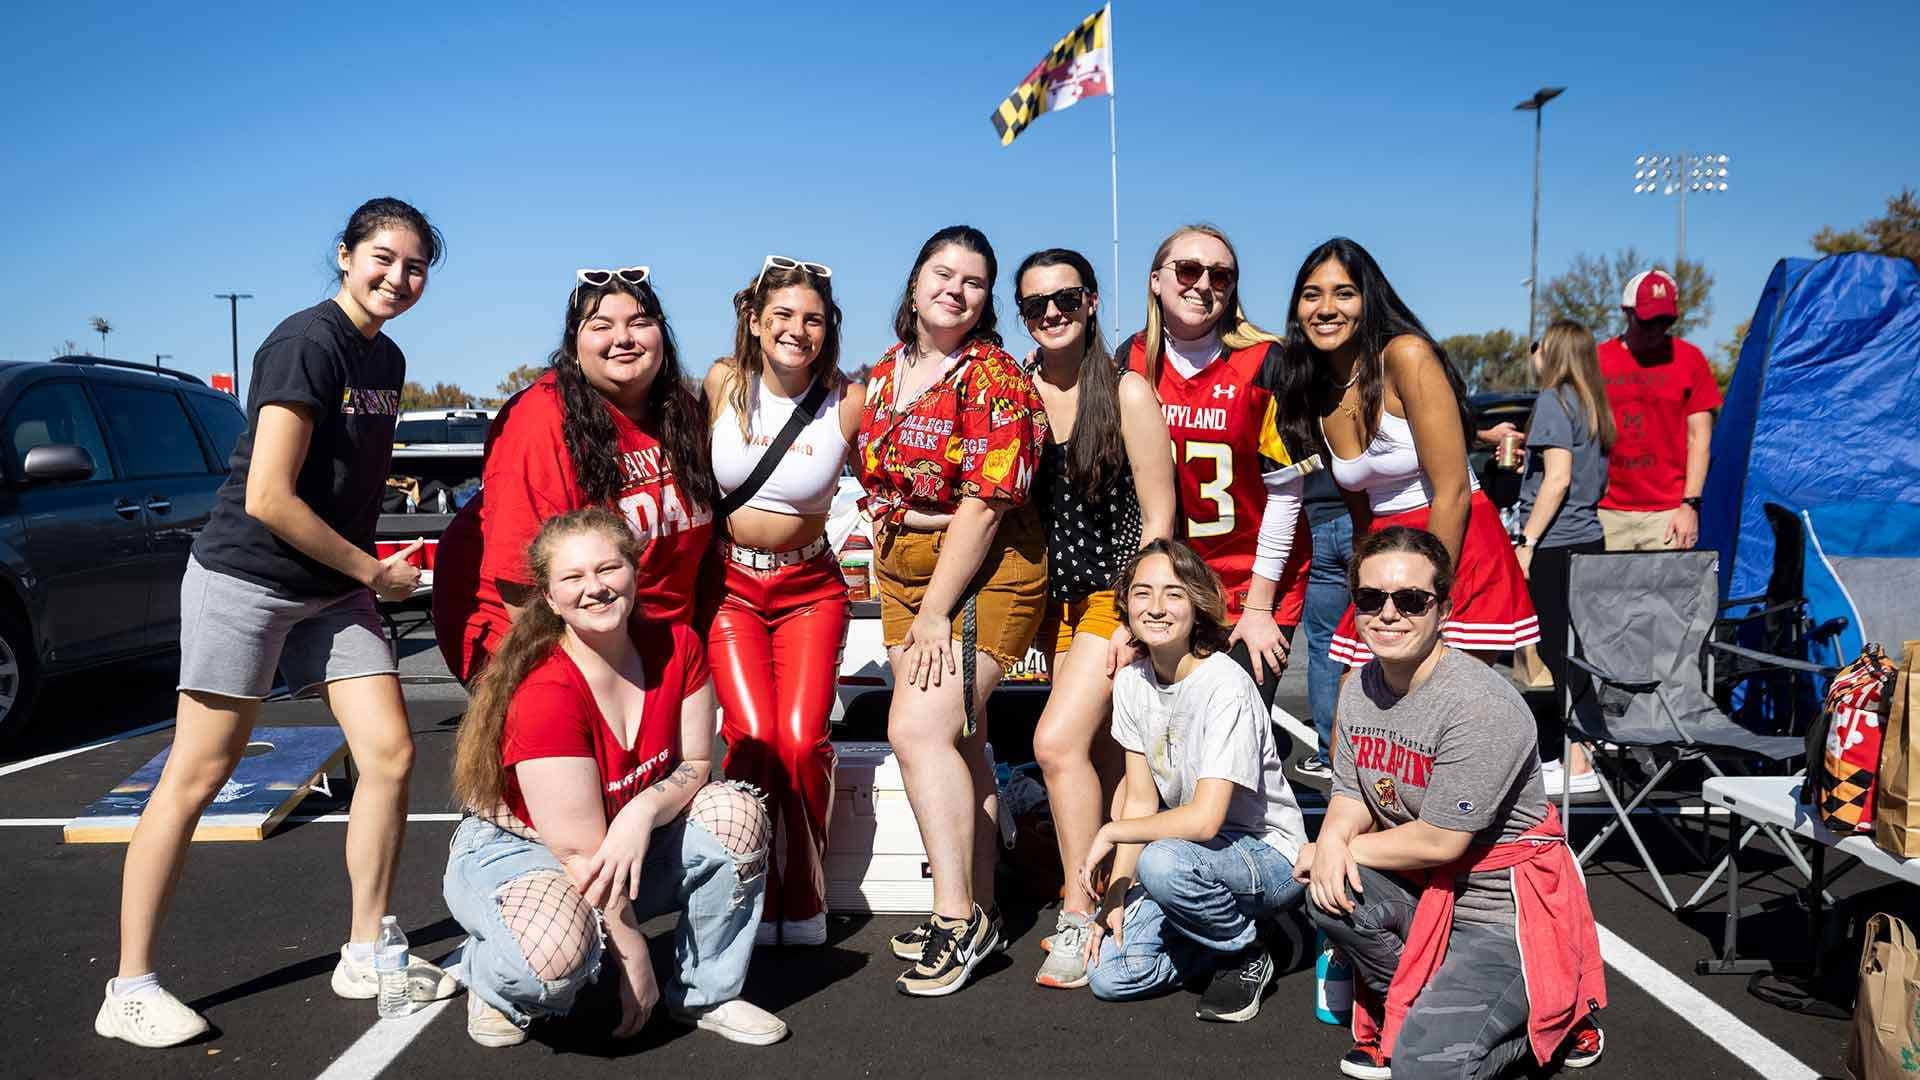 sorority members pose for photo at tailgate party